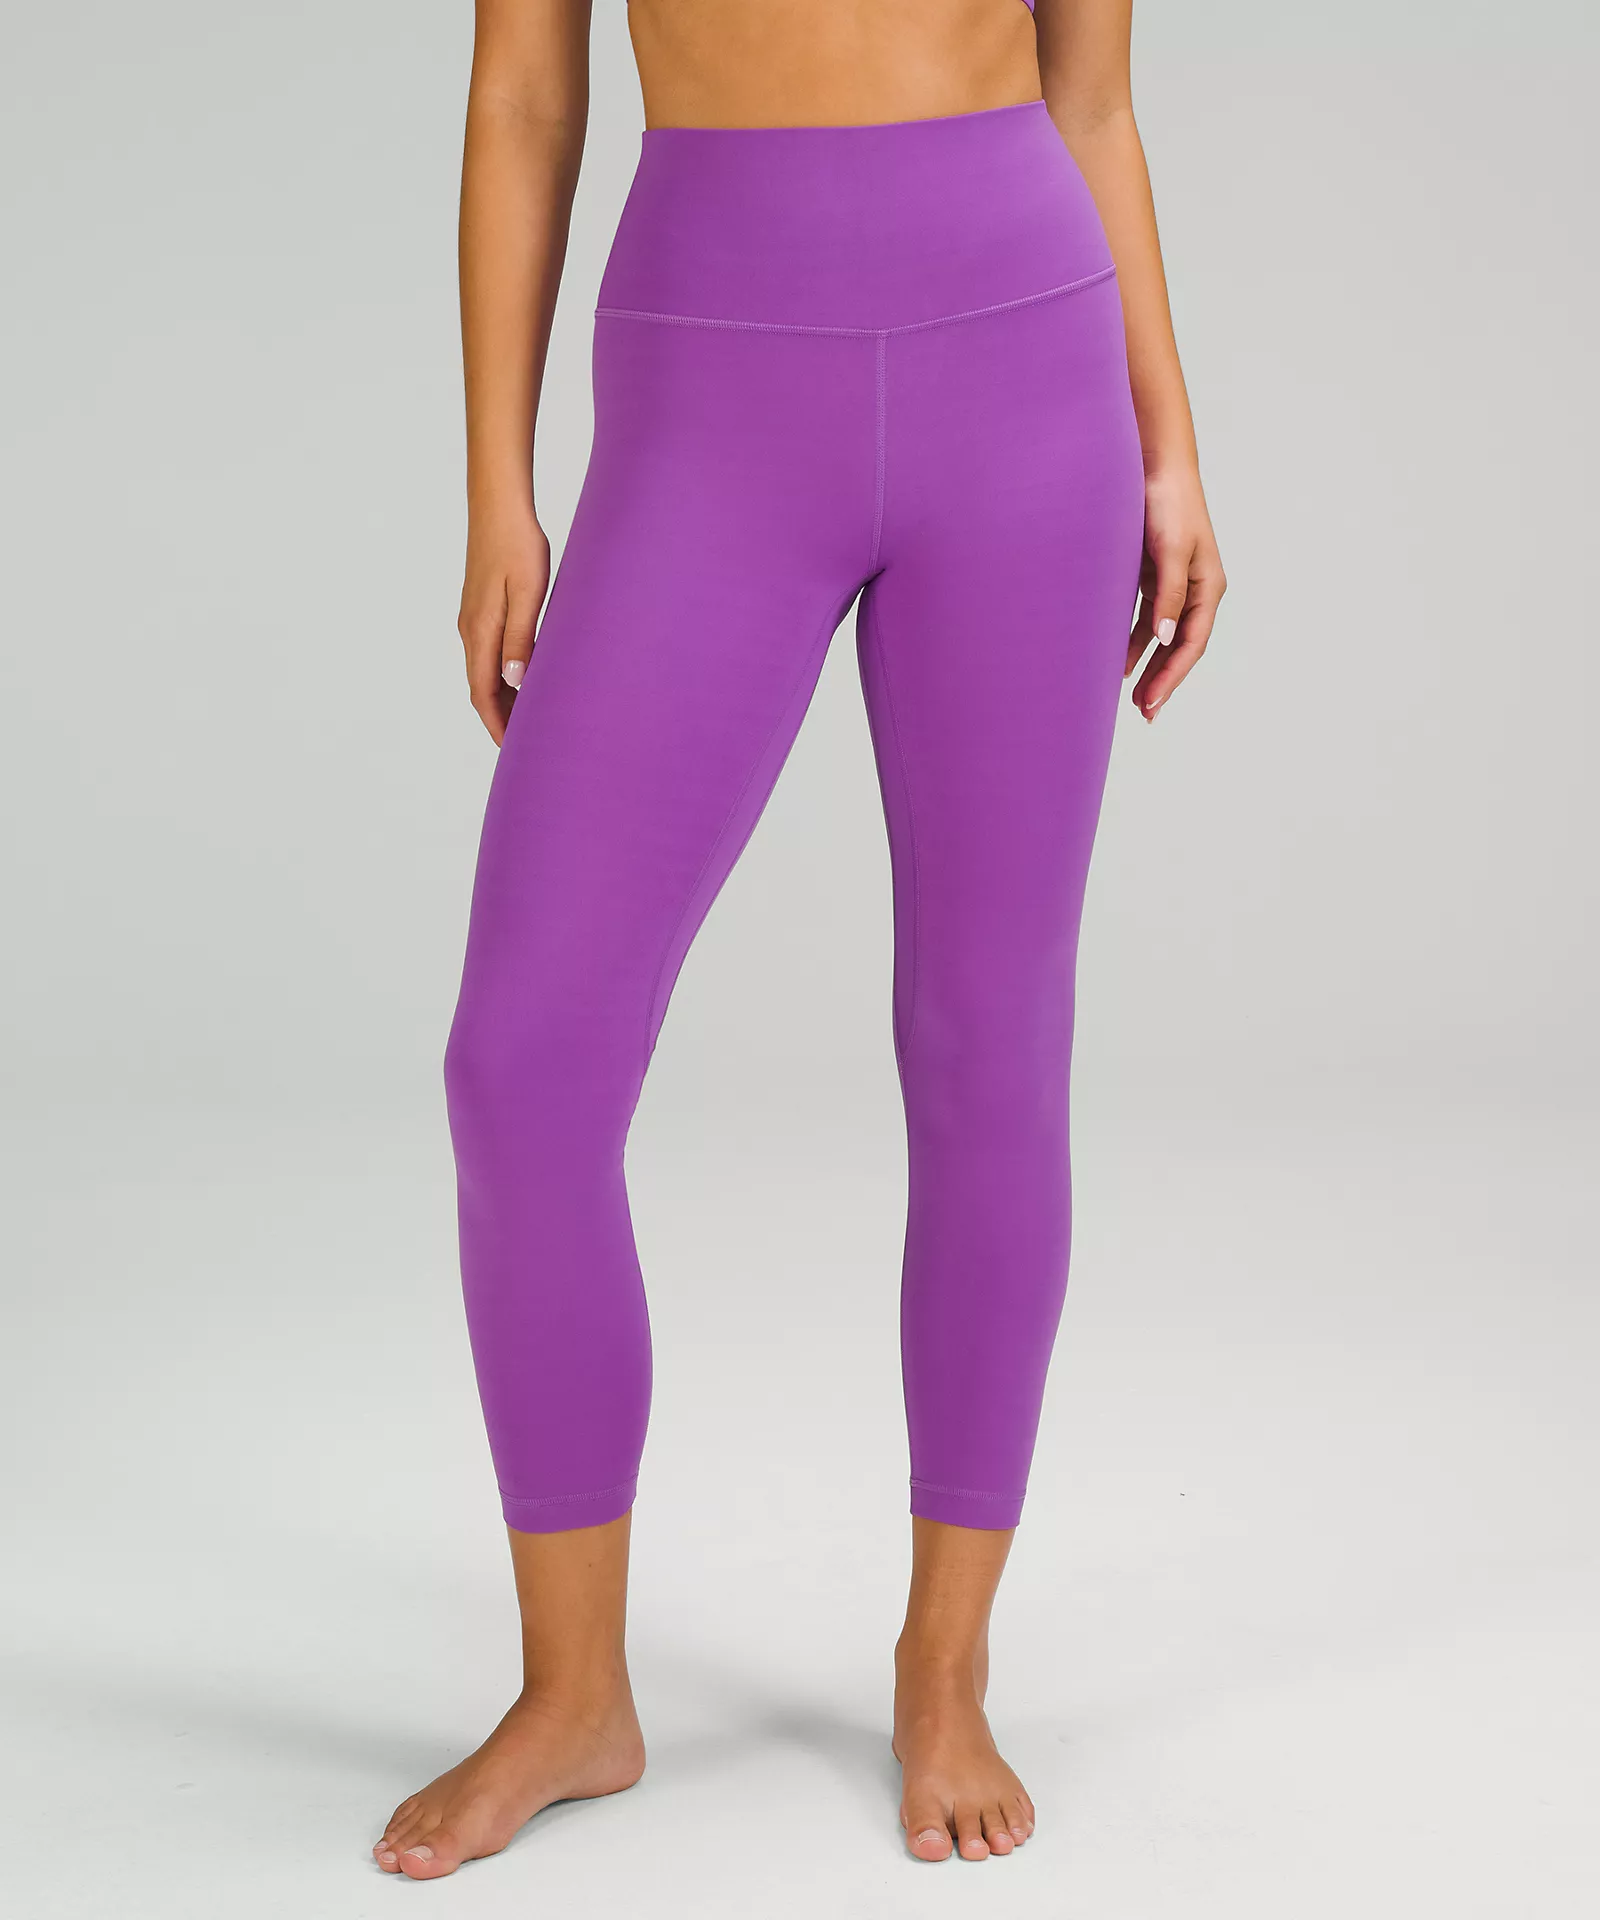 Lululemon Align Leggings Are Discounted—But Not for Long | Well+Good